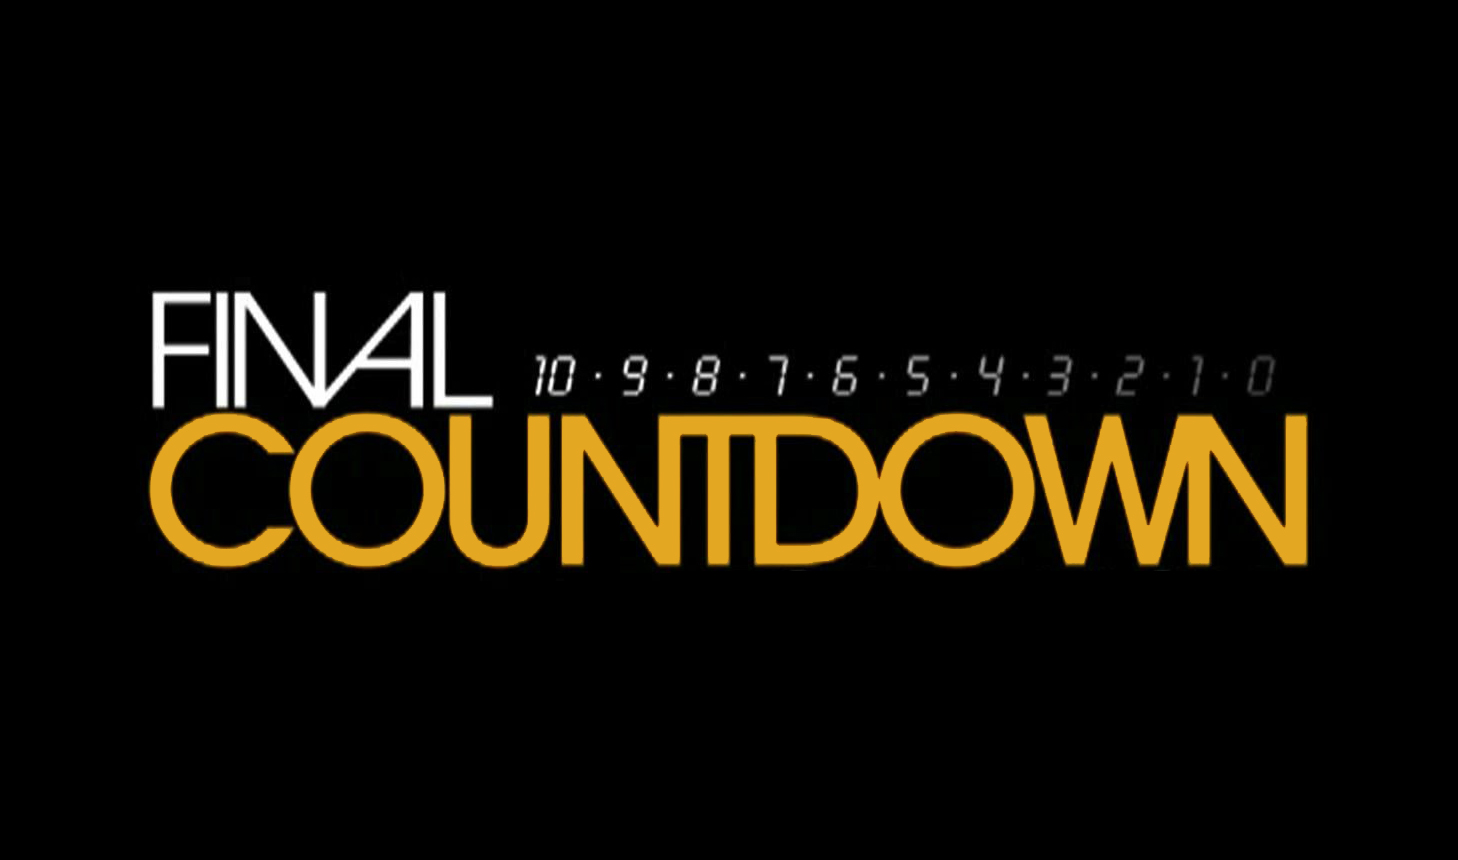 The Final Countdown #27